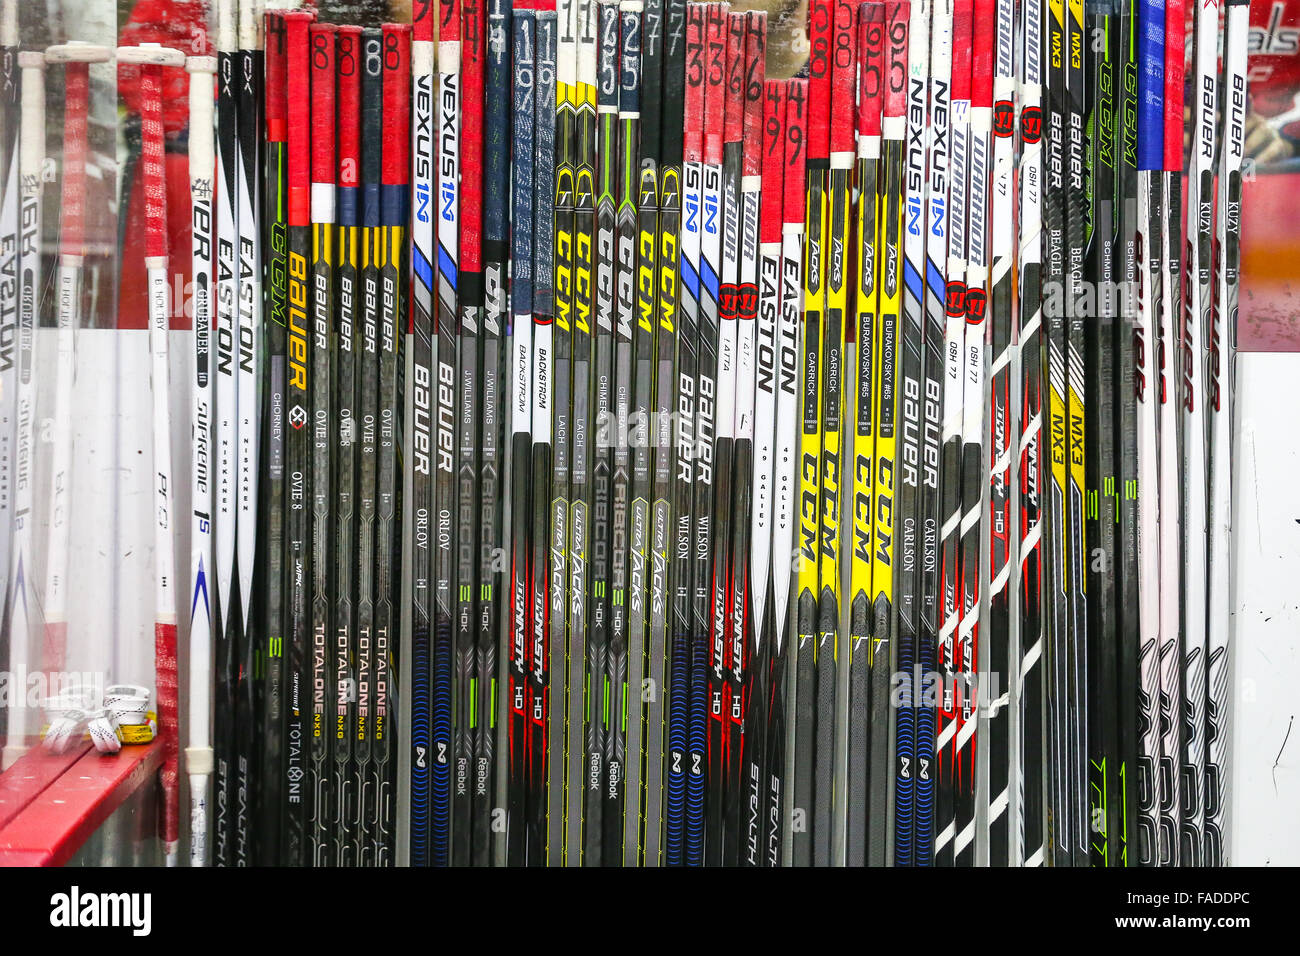 Washington Capitals hockey sticks during the NHL game between the Washington Capitals and the Carolina Hurricanes at the PNC Arena. Stock Photo